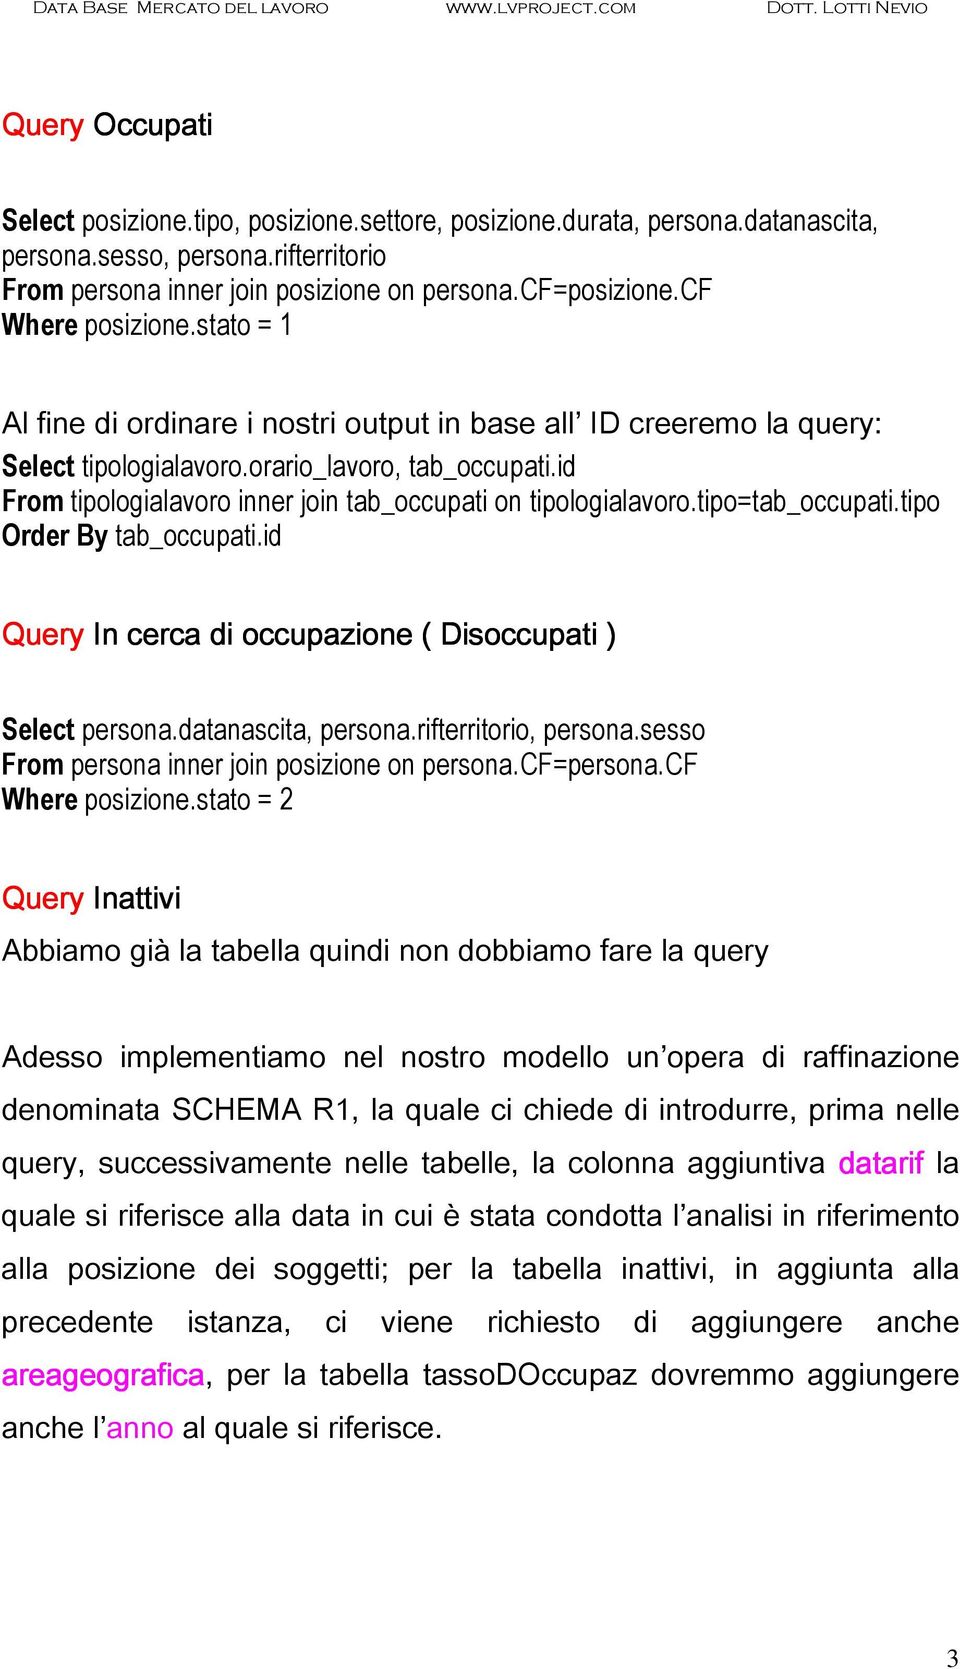 id From tipologialavoro inner join tab_occupati on tipologialavoro.tipo=tab_occupati.tipo Order By tab_occupati.id Query In cerca c di occupazione ( Disoccupati ) Select persona.datanascita, persona.